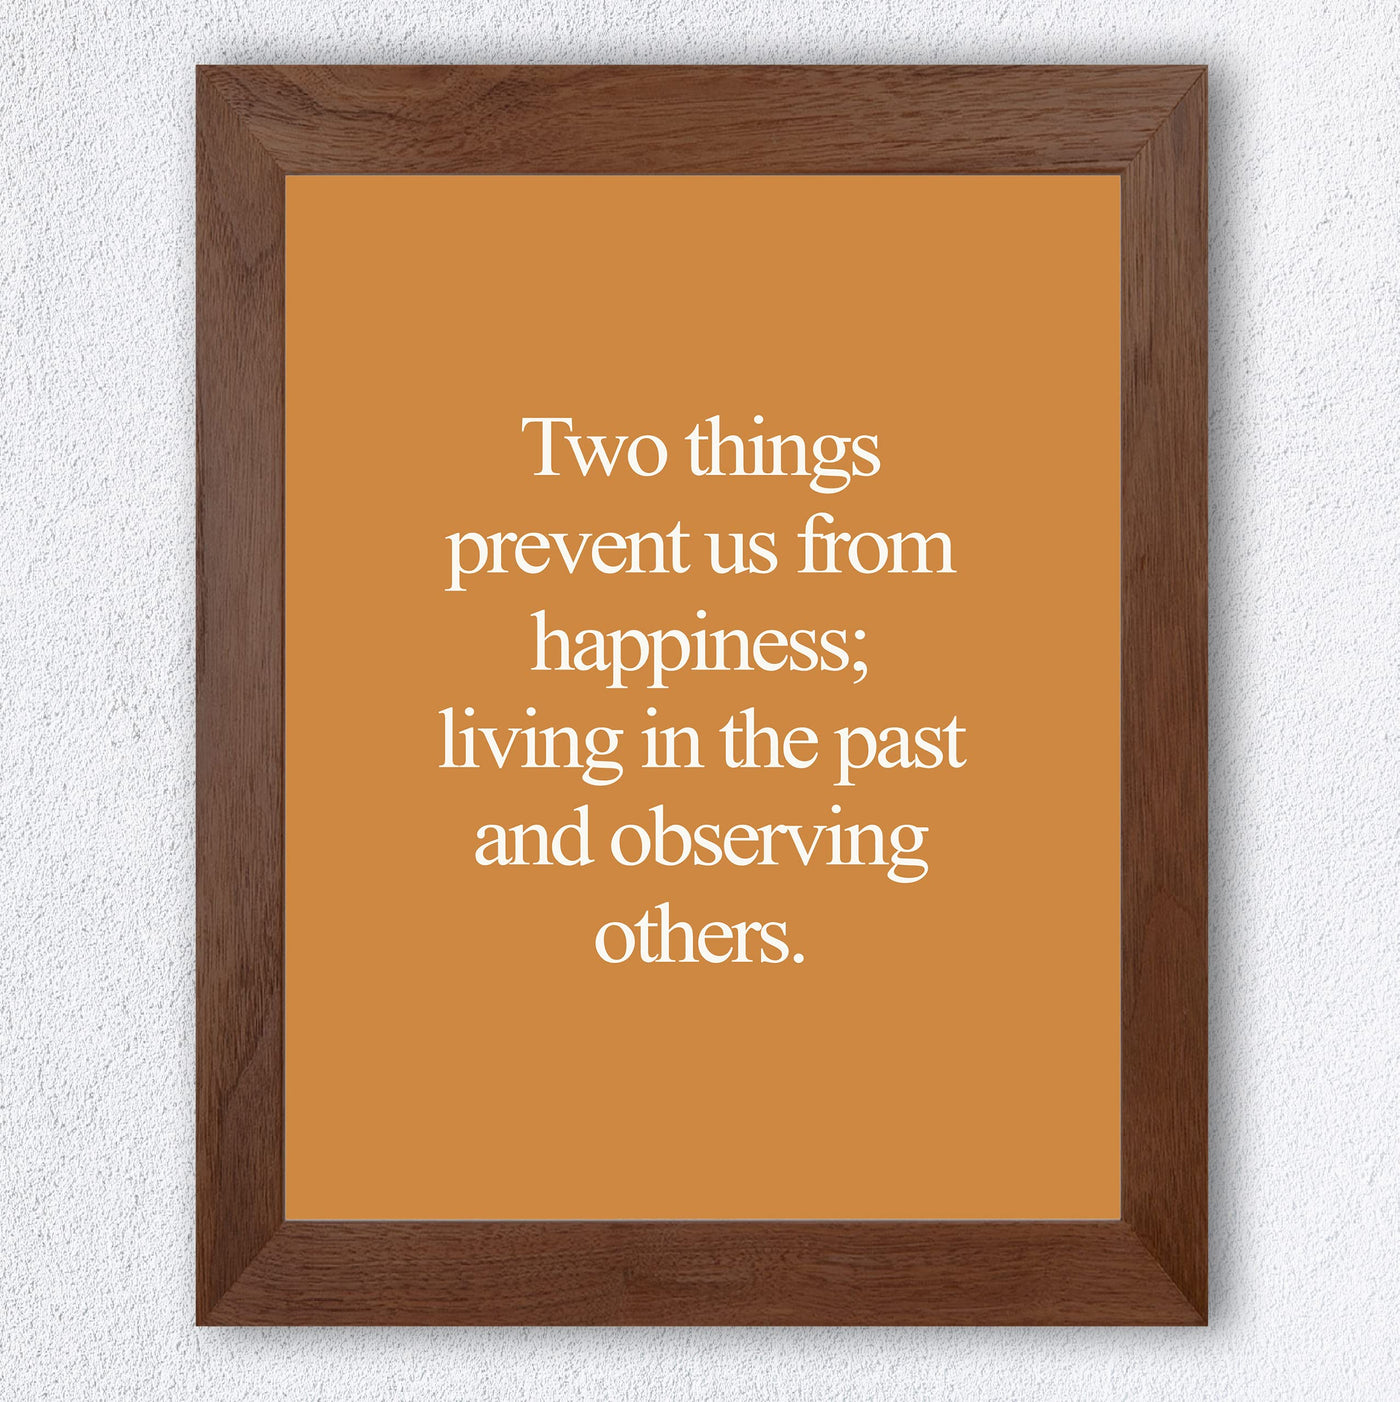 Two Things Prevent Happiness: Living In Past & Observing Others Inspirational Quotes Wall Decor -8 x 10" Motivational Art Print -Ready to Frame. Home-Office-School-Work Decor. Great Life Lesson!